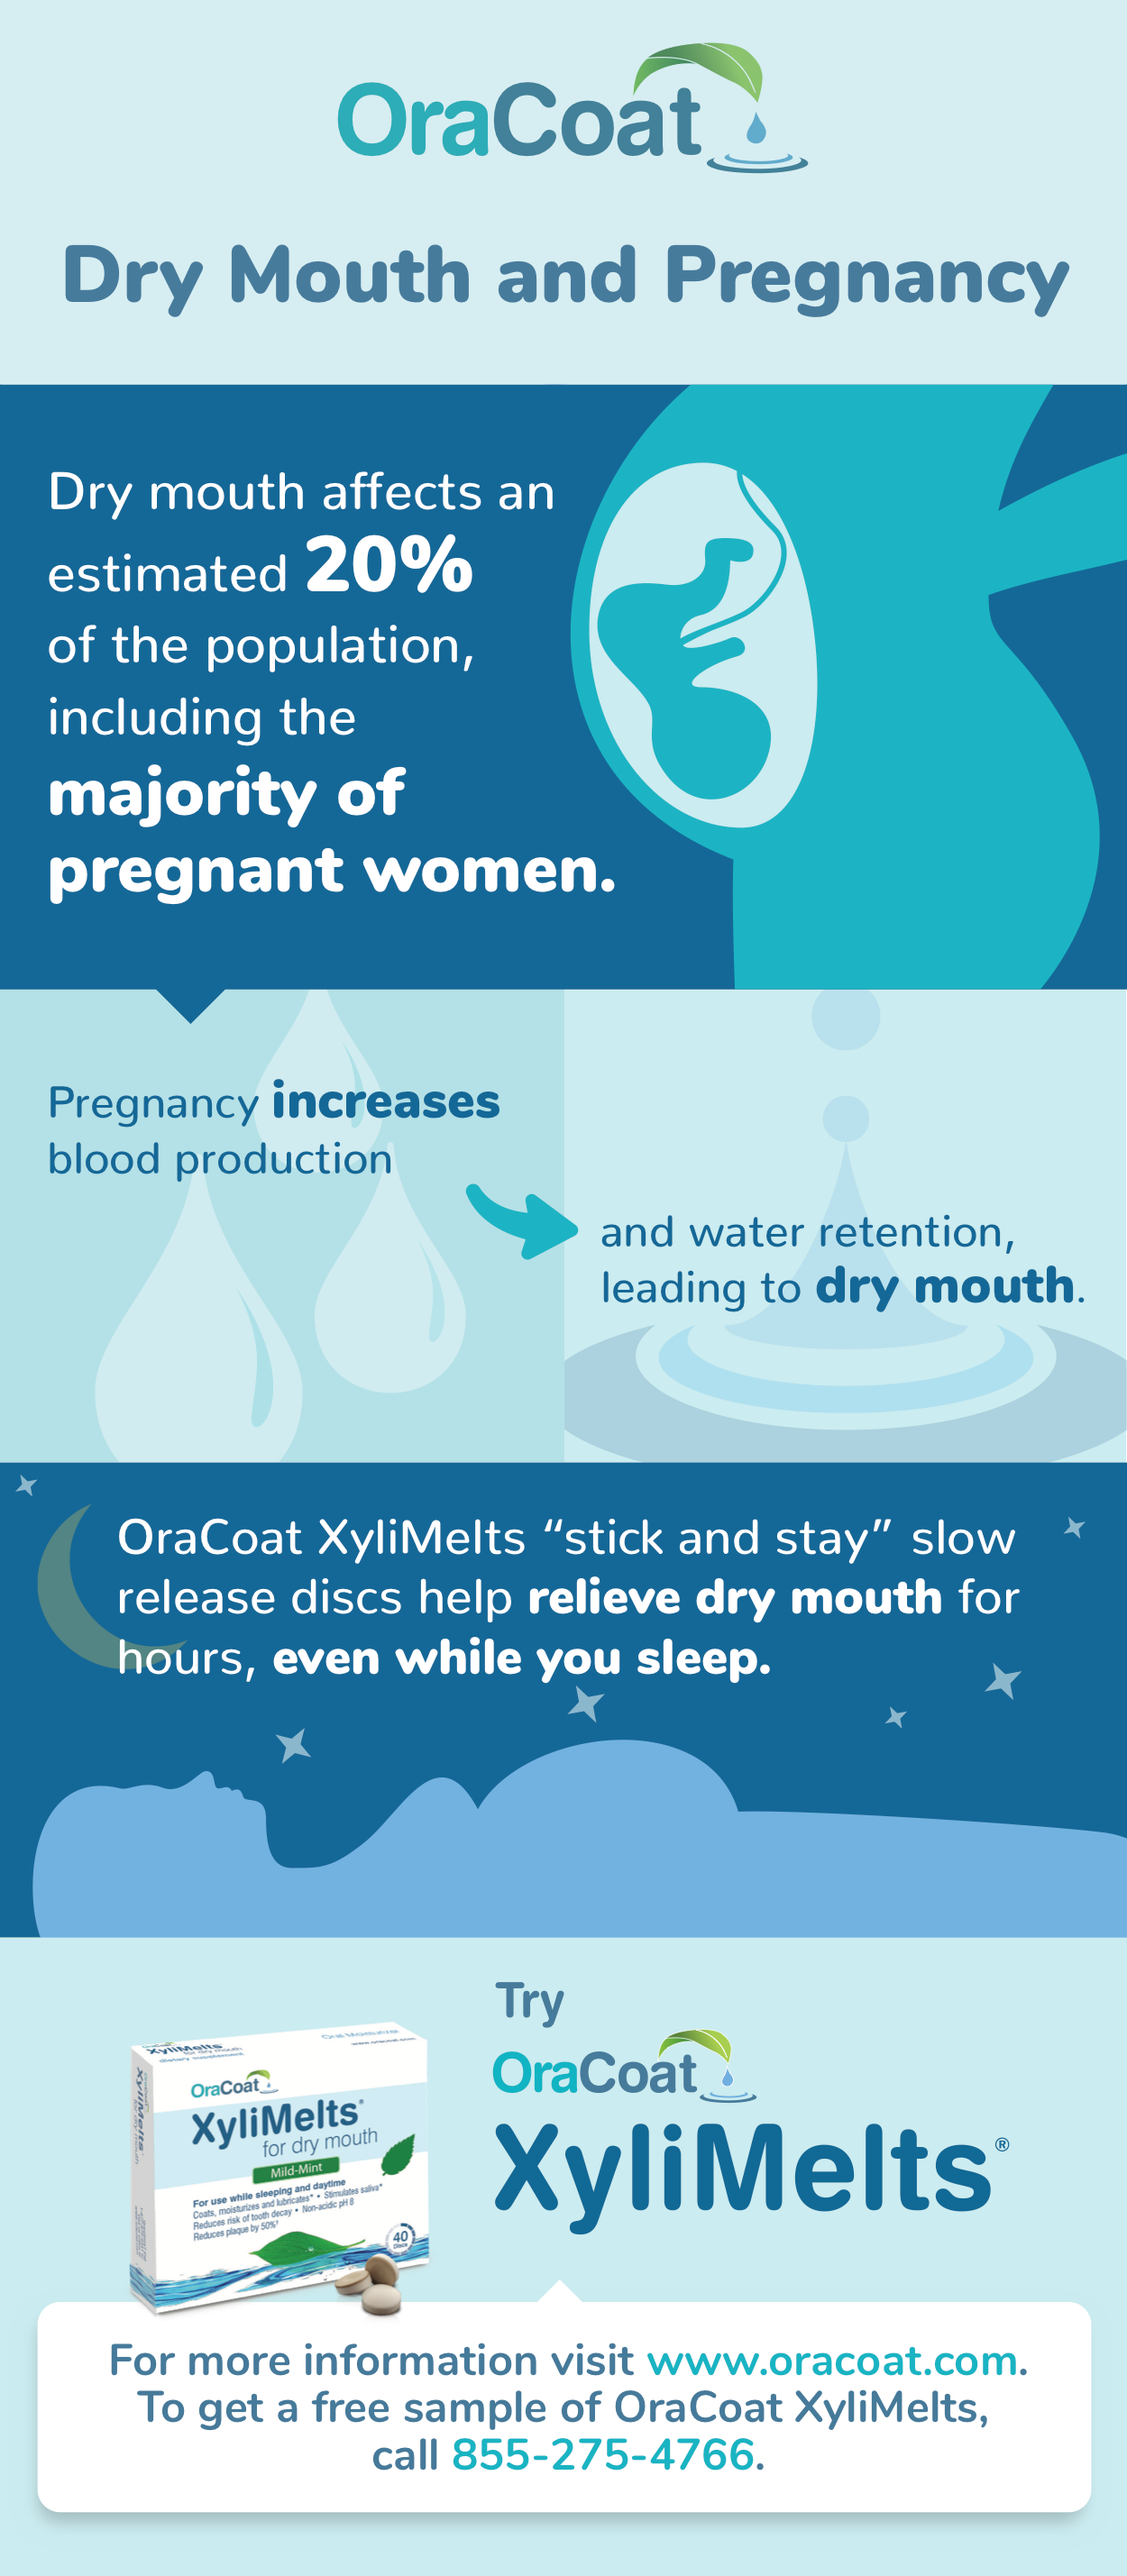 OR50 112321 PregnancyandDryMouth Infographic V1.1%2520(1)